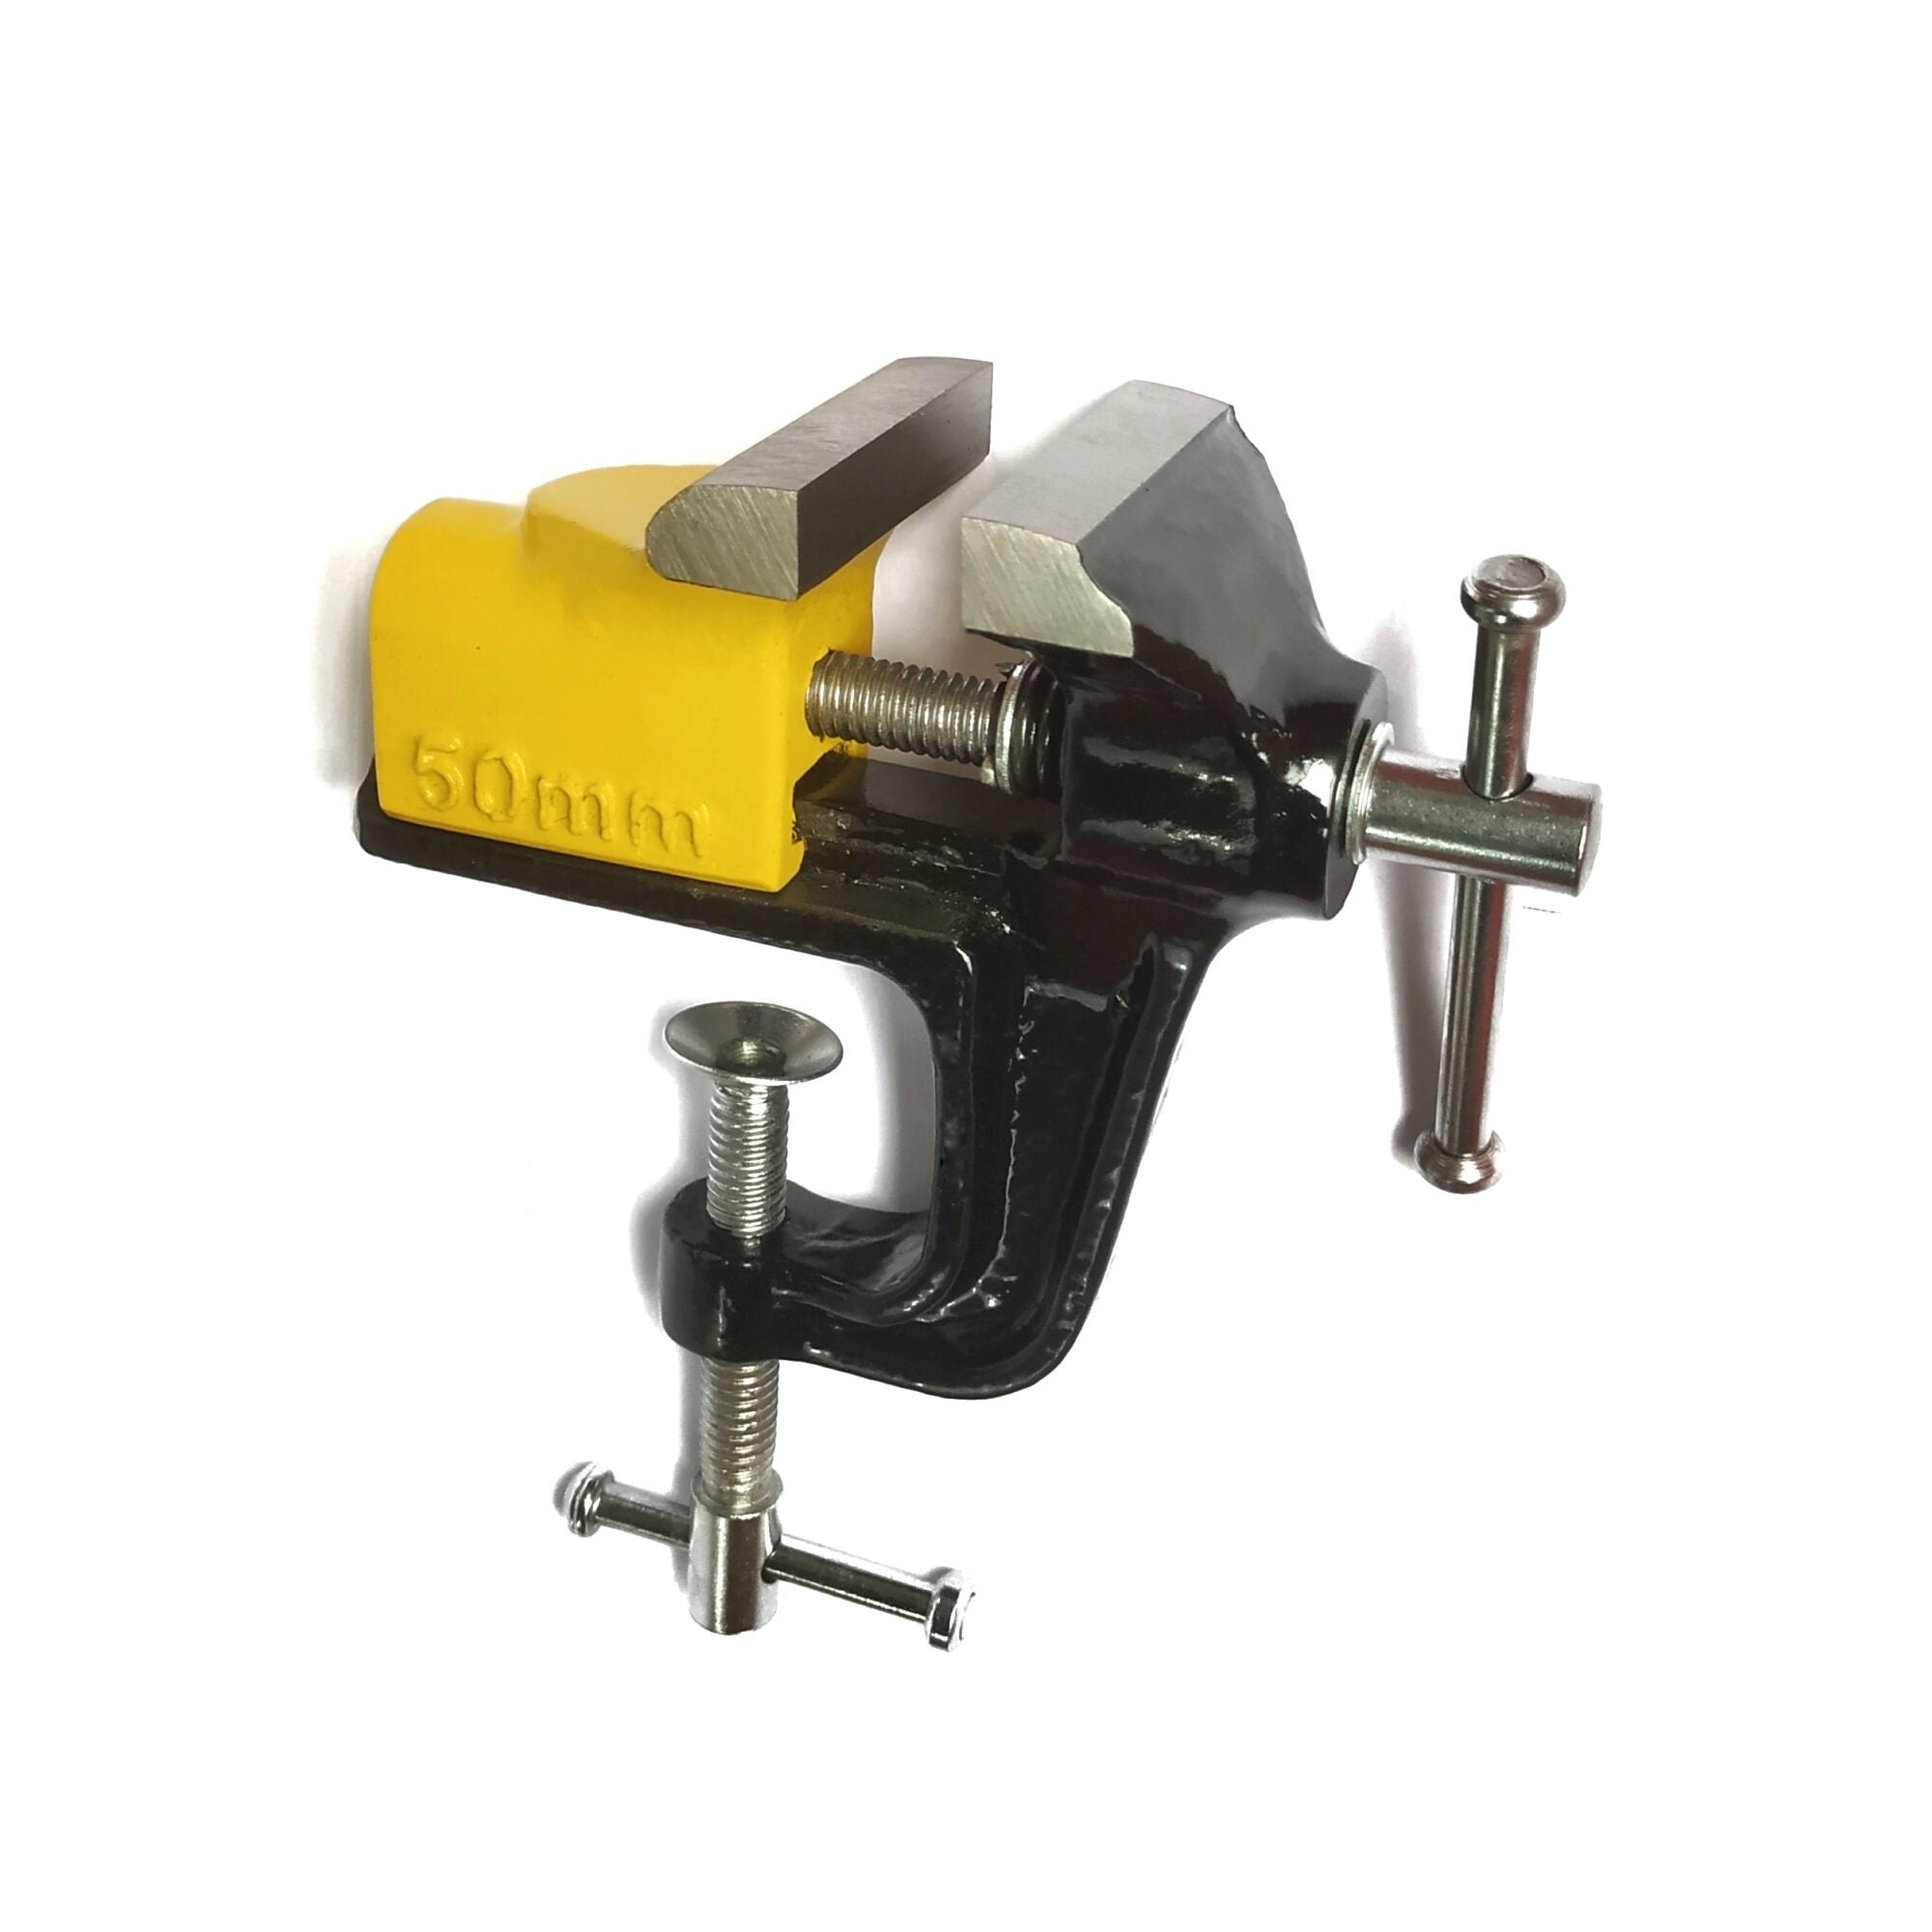 Climax Table Baby Vice with Integrated Clamp 32-100mm CTC-TBV-C